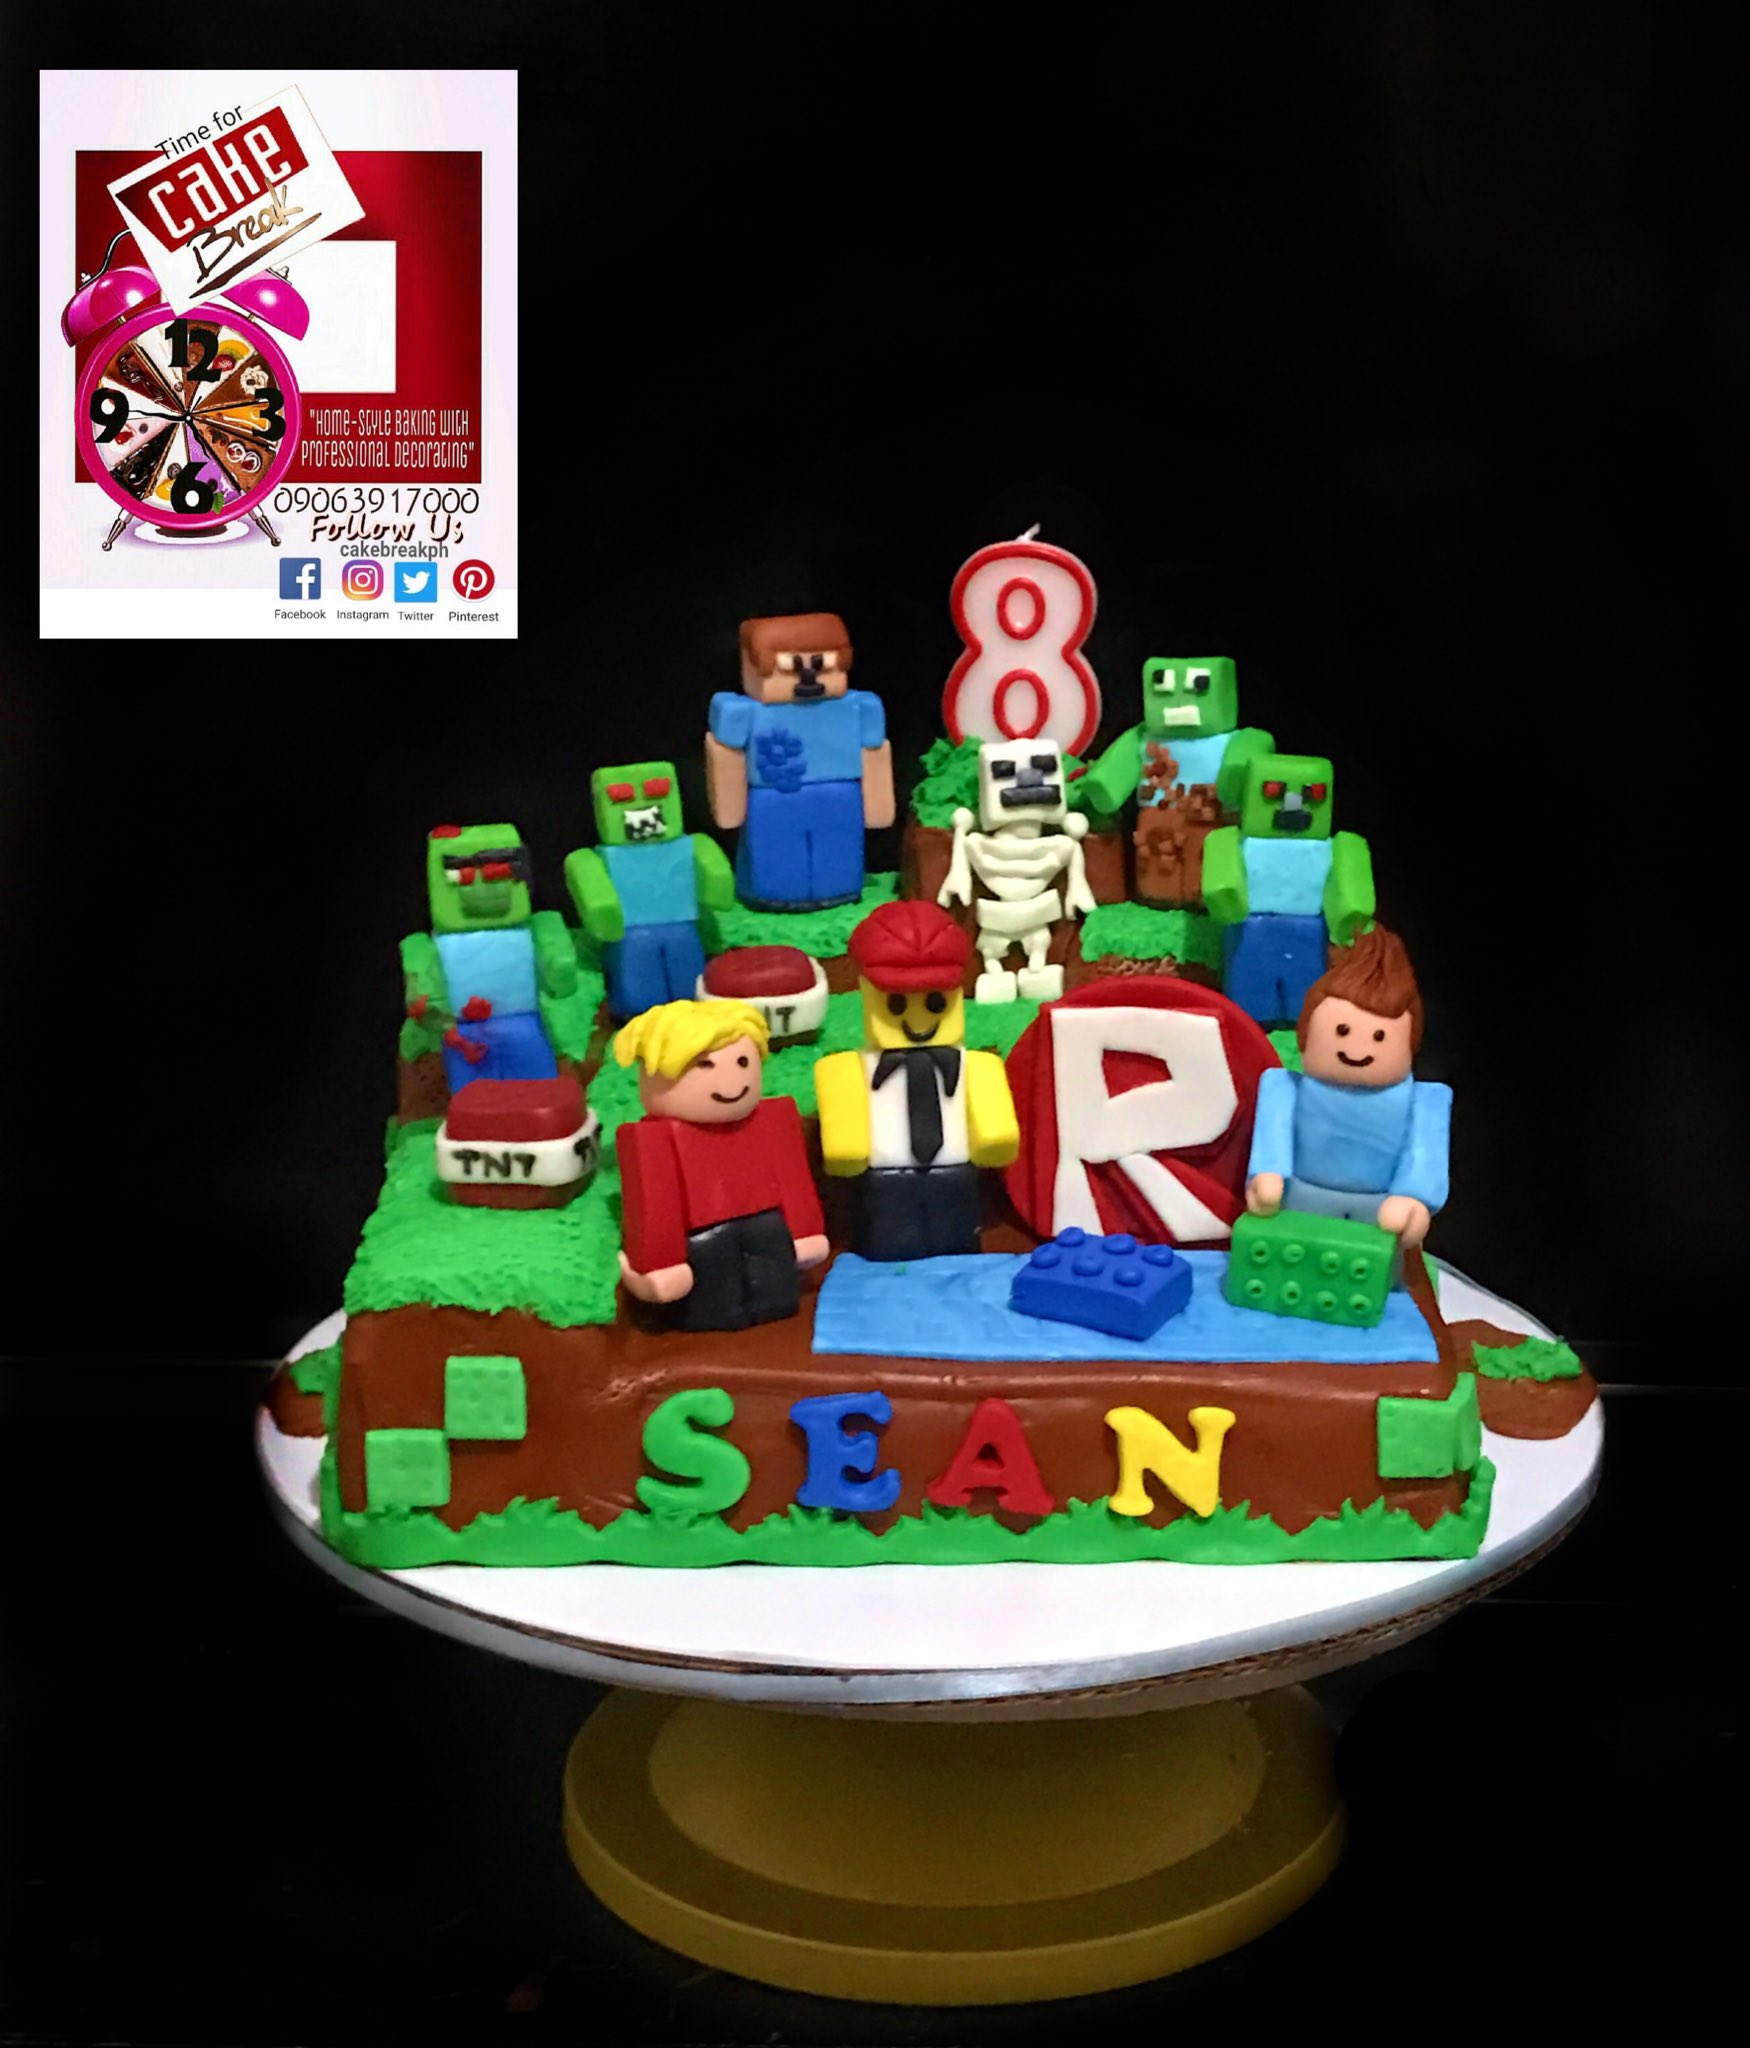 Cake Break On Twitter Minecraft Zombies Roblox Themed Cake For